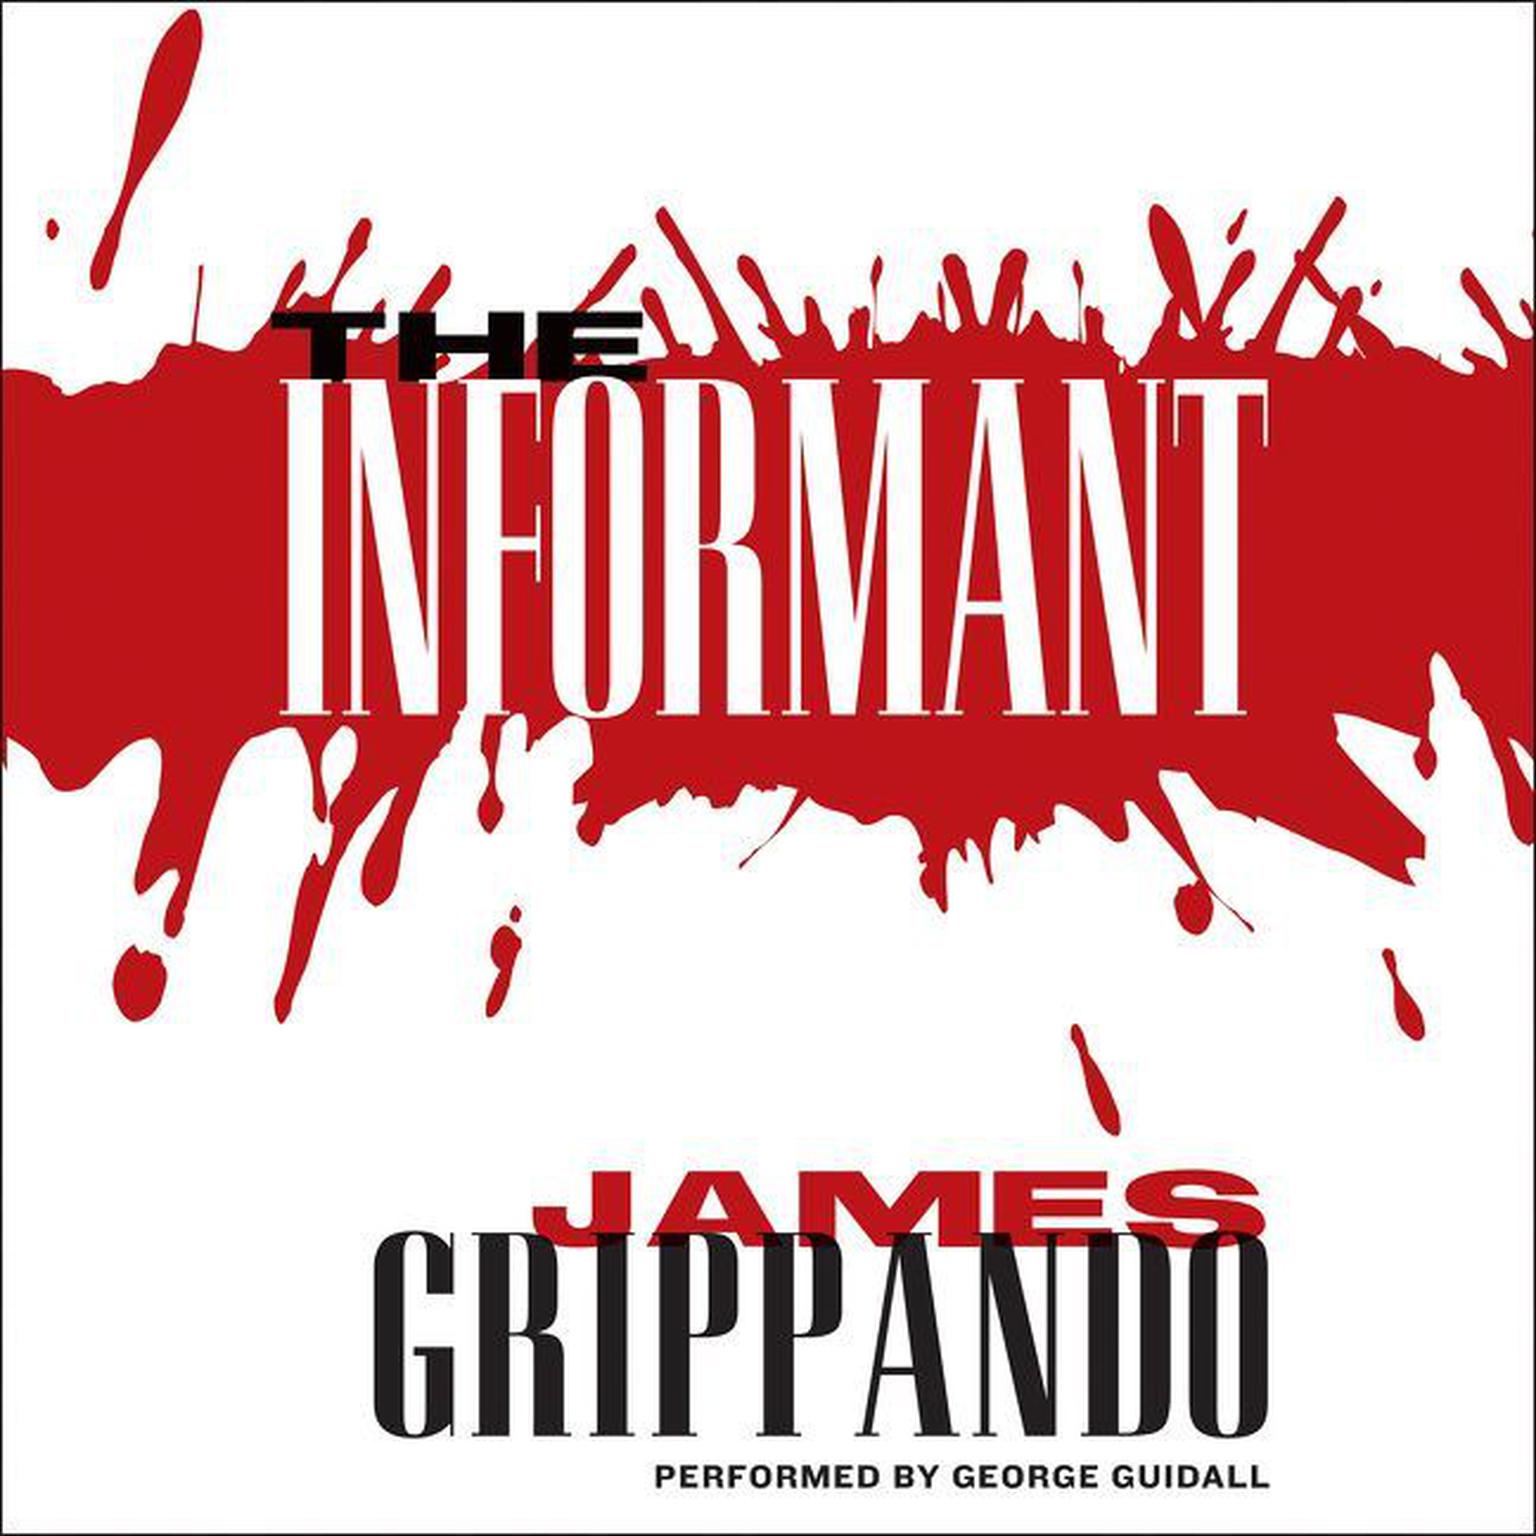 The Informant Audiobook, by James Grippando